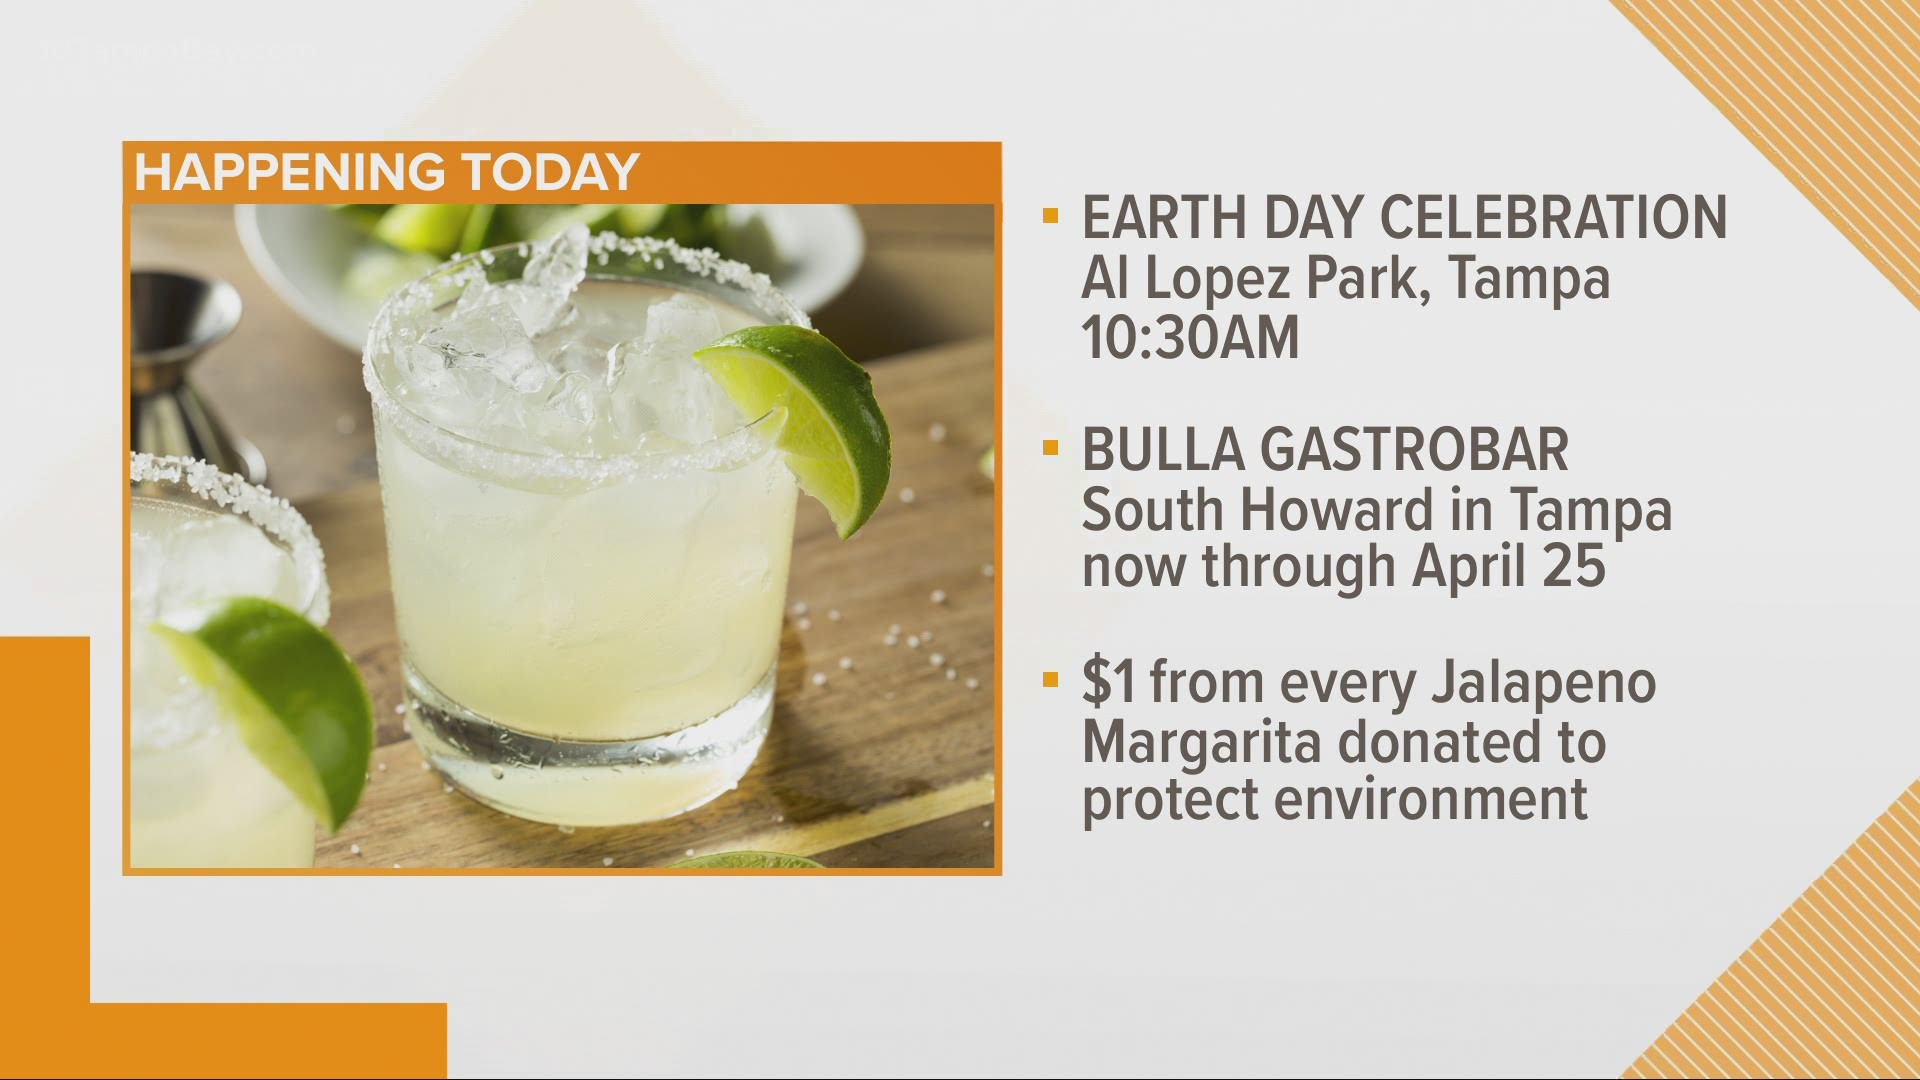 Earth Day is April 22, so don't miss out on these events happening around the area.